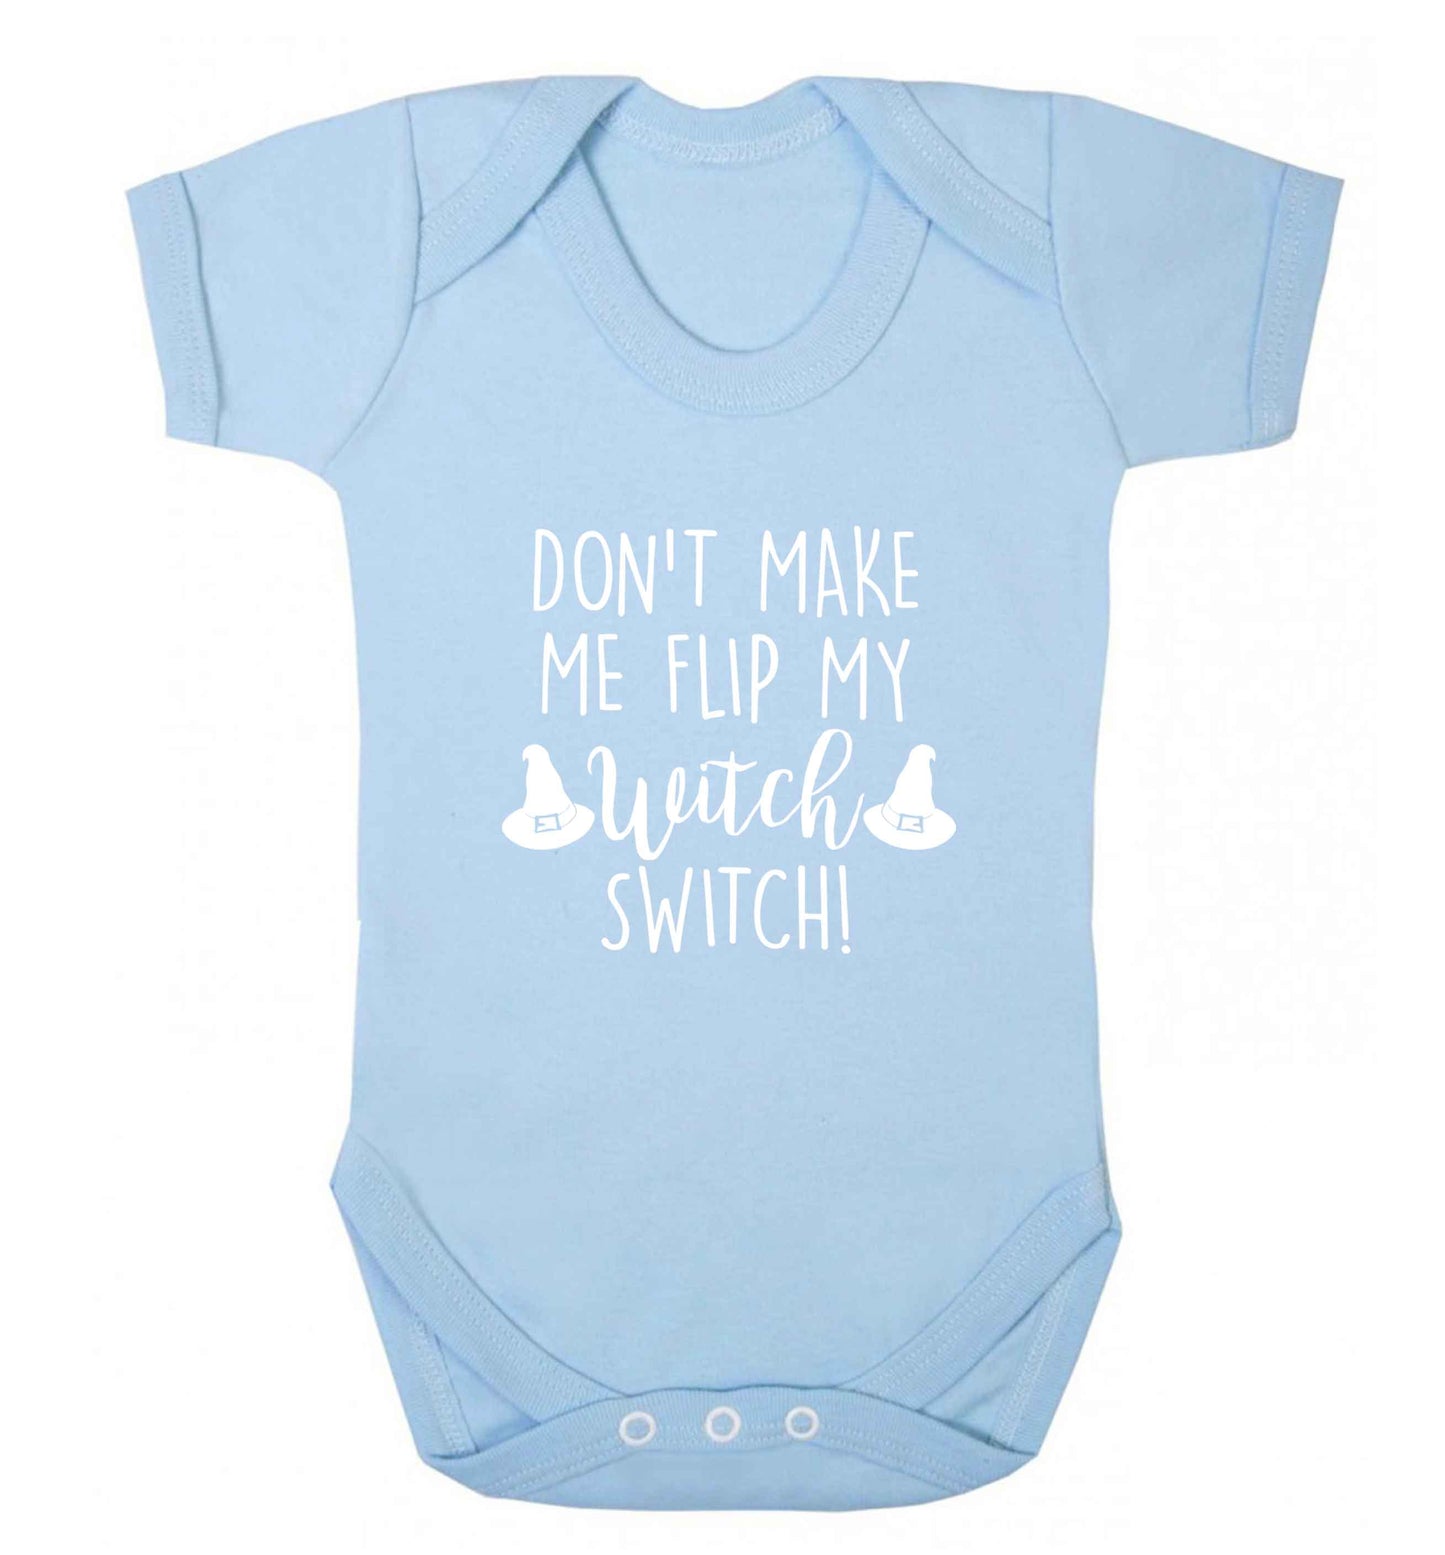 Don't make me flip my witch switch baby vest pale blue 18-24 months